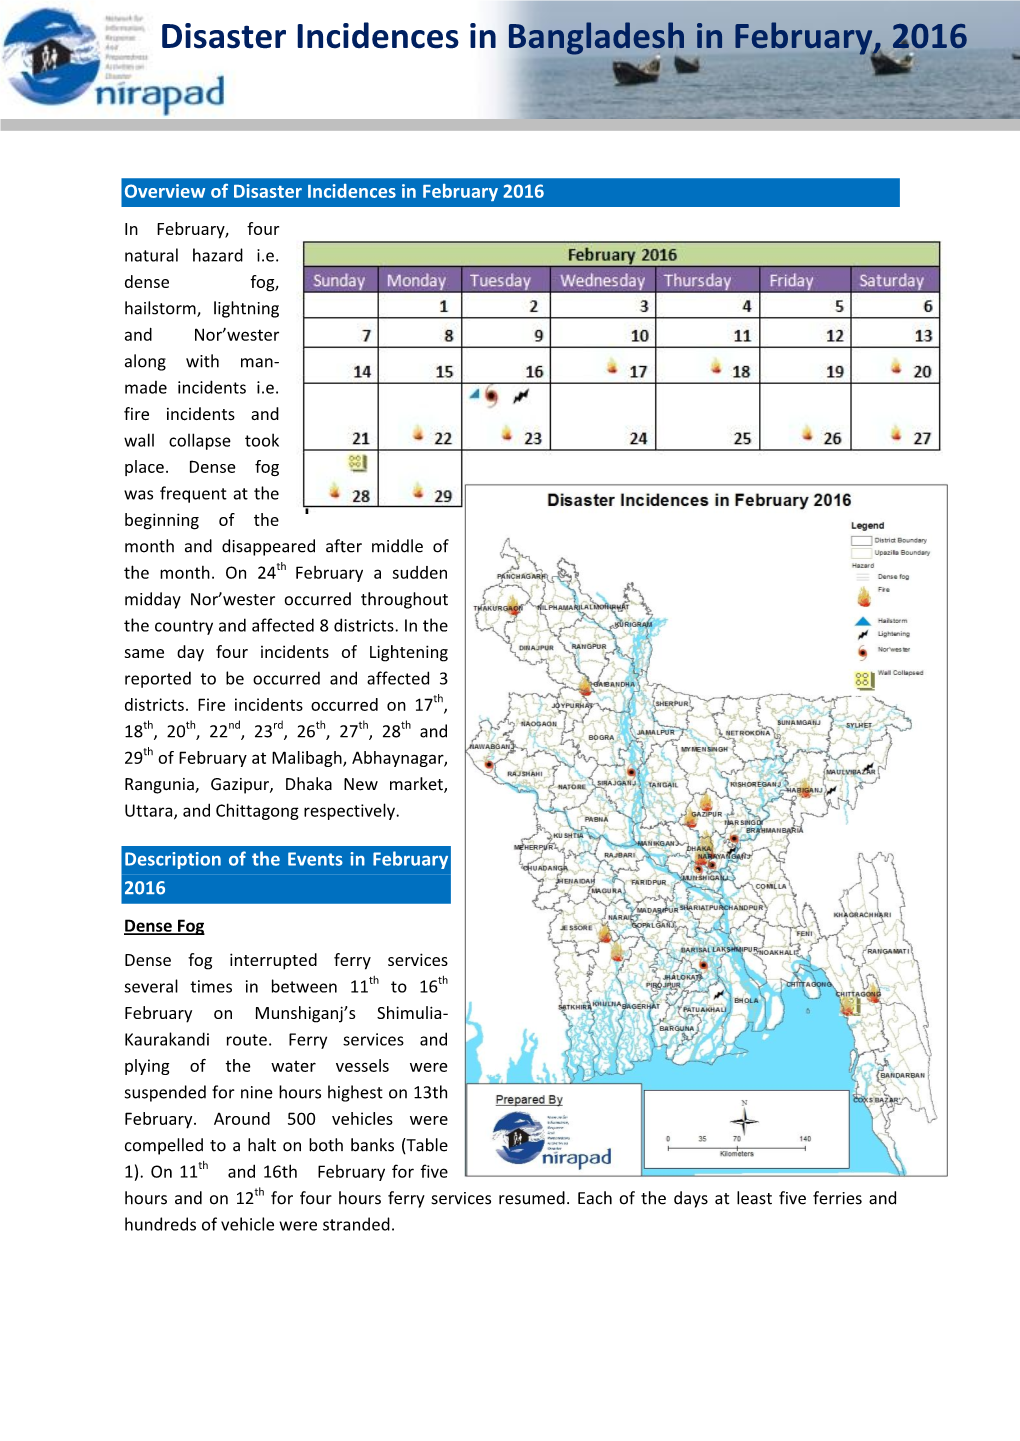 Disaster Incidences in Bangladesh in February, 2016